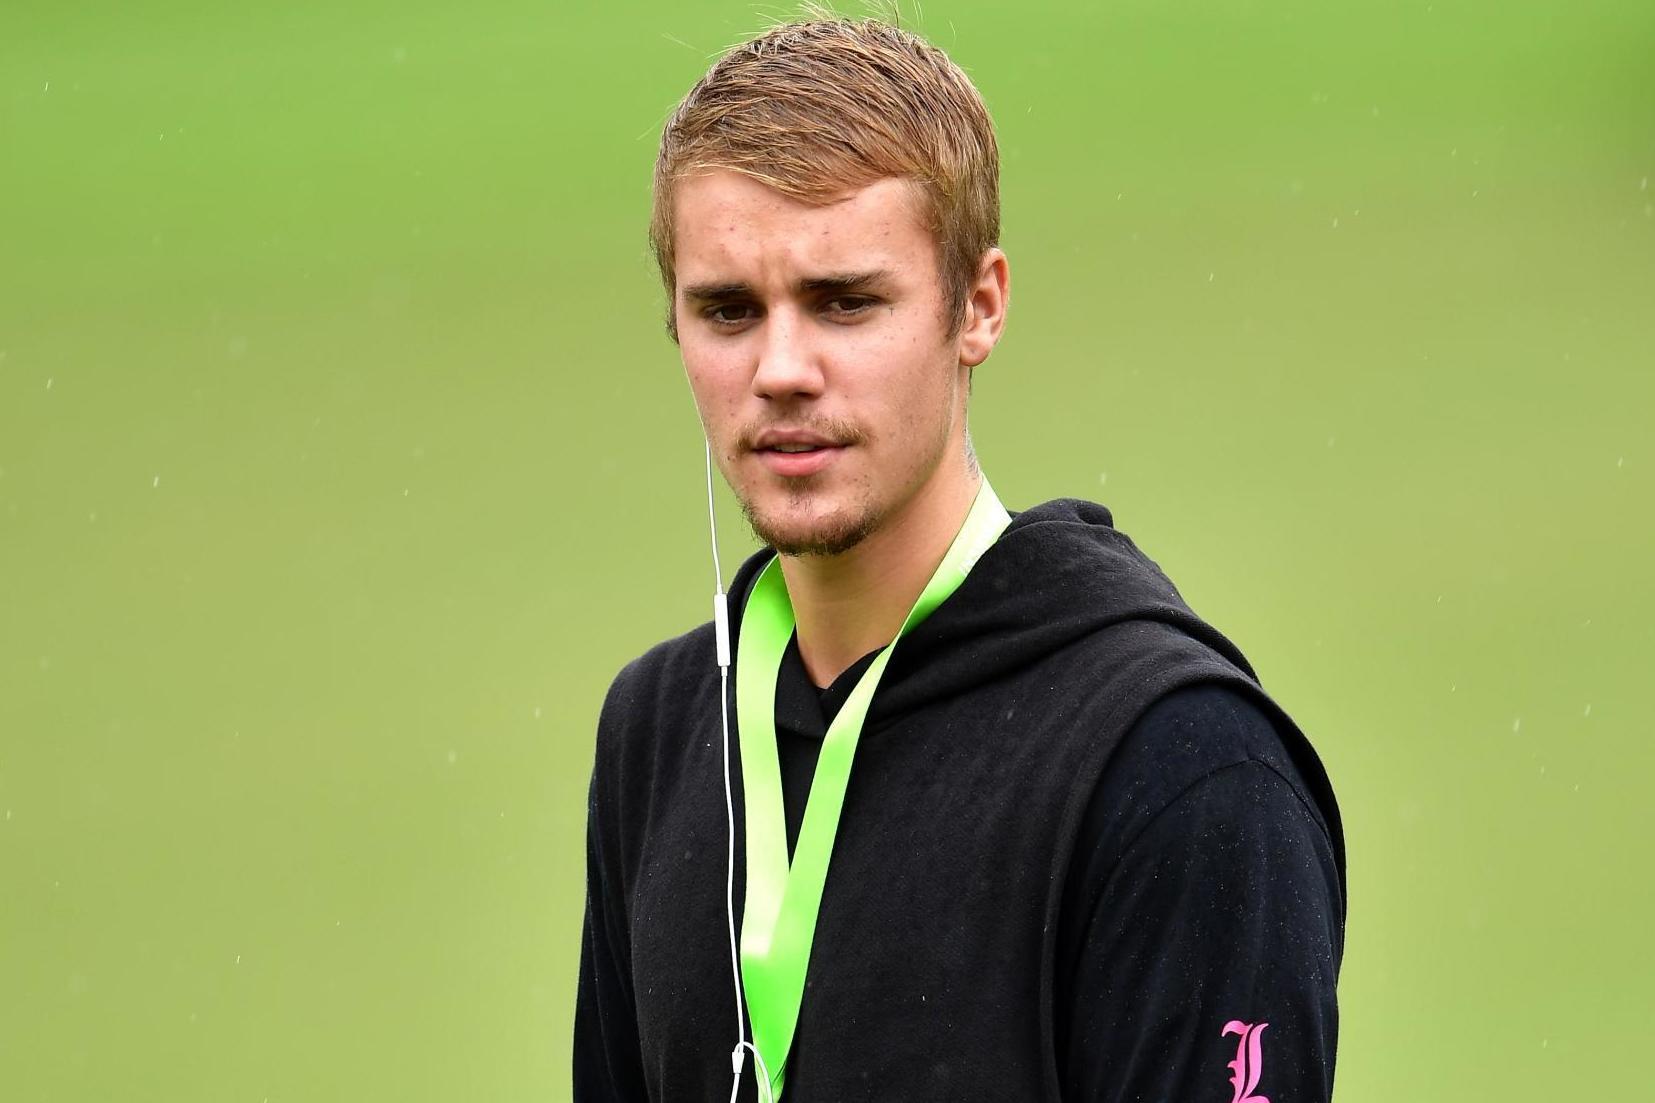 Justin Bieber asks fans to take a stand against racism (Getty)